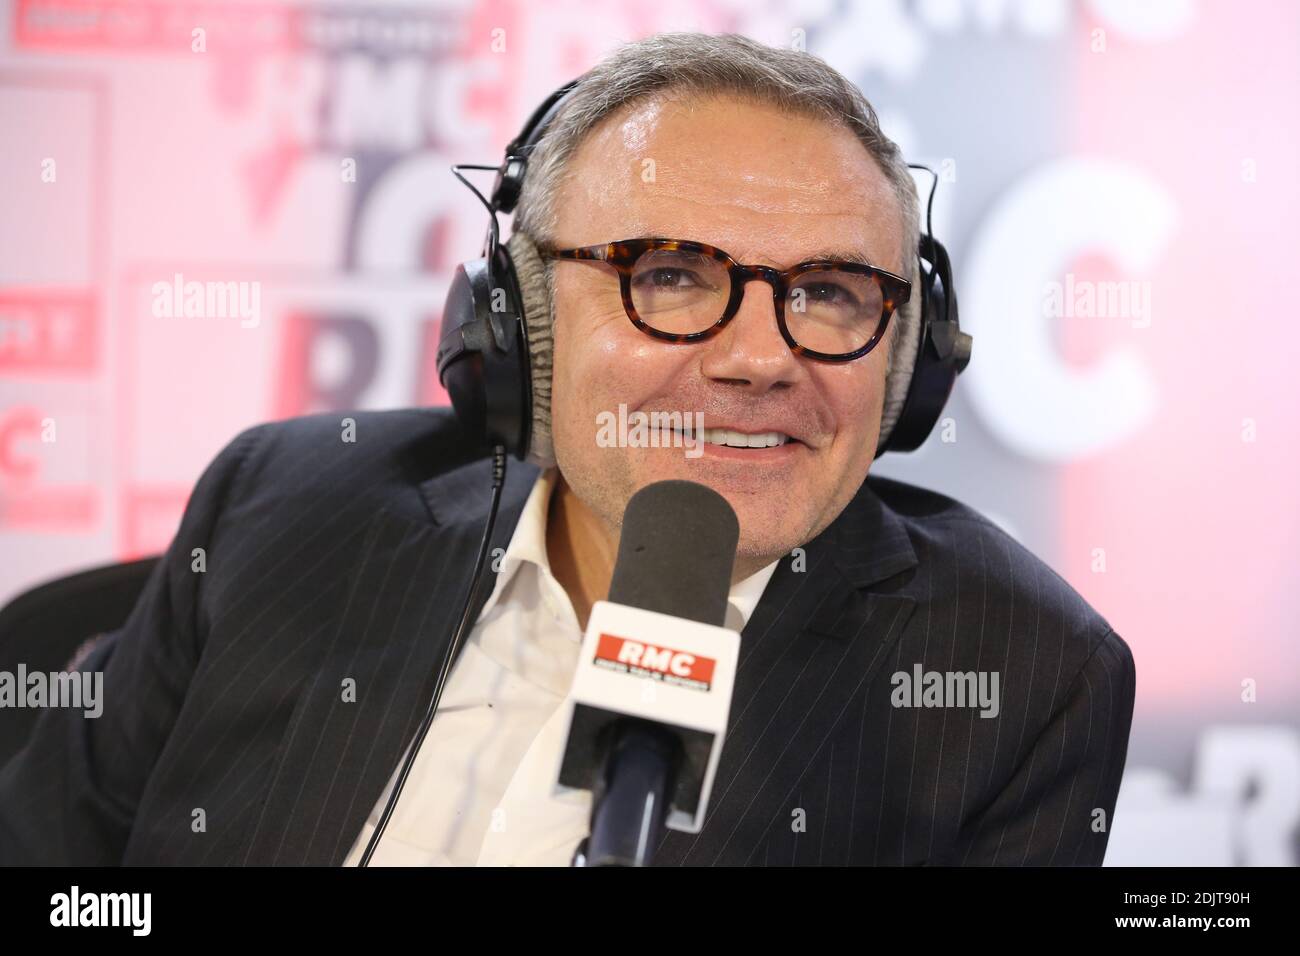 Exclusive - Eric Brunet at the 'Radio Brunet' talk show on RMC Radio, in  Paris, France, on November 07, 2016. Photo by Jerome Domine/ABACAPRESS.COM  Stock Photo - Alamy